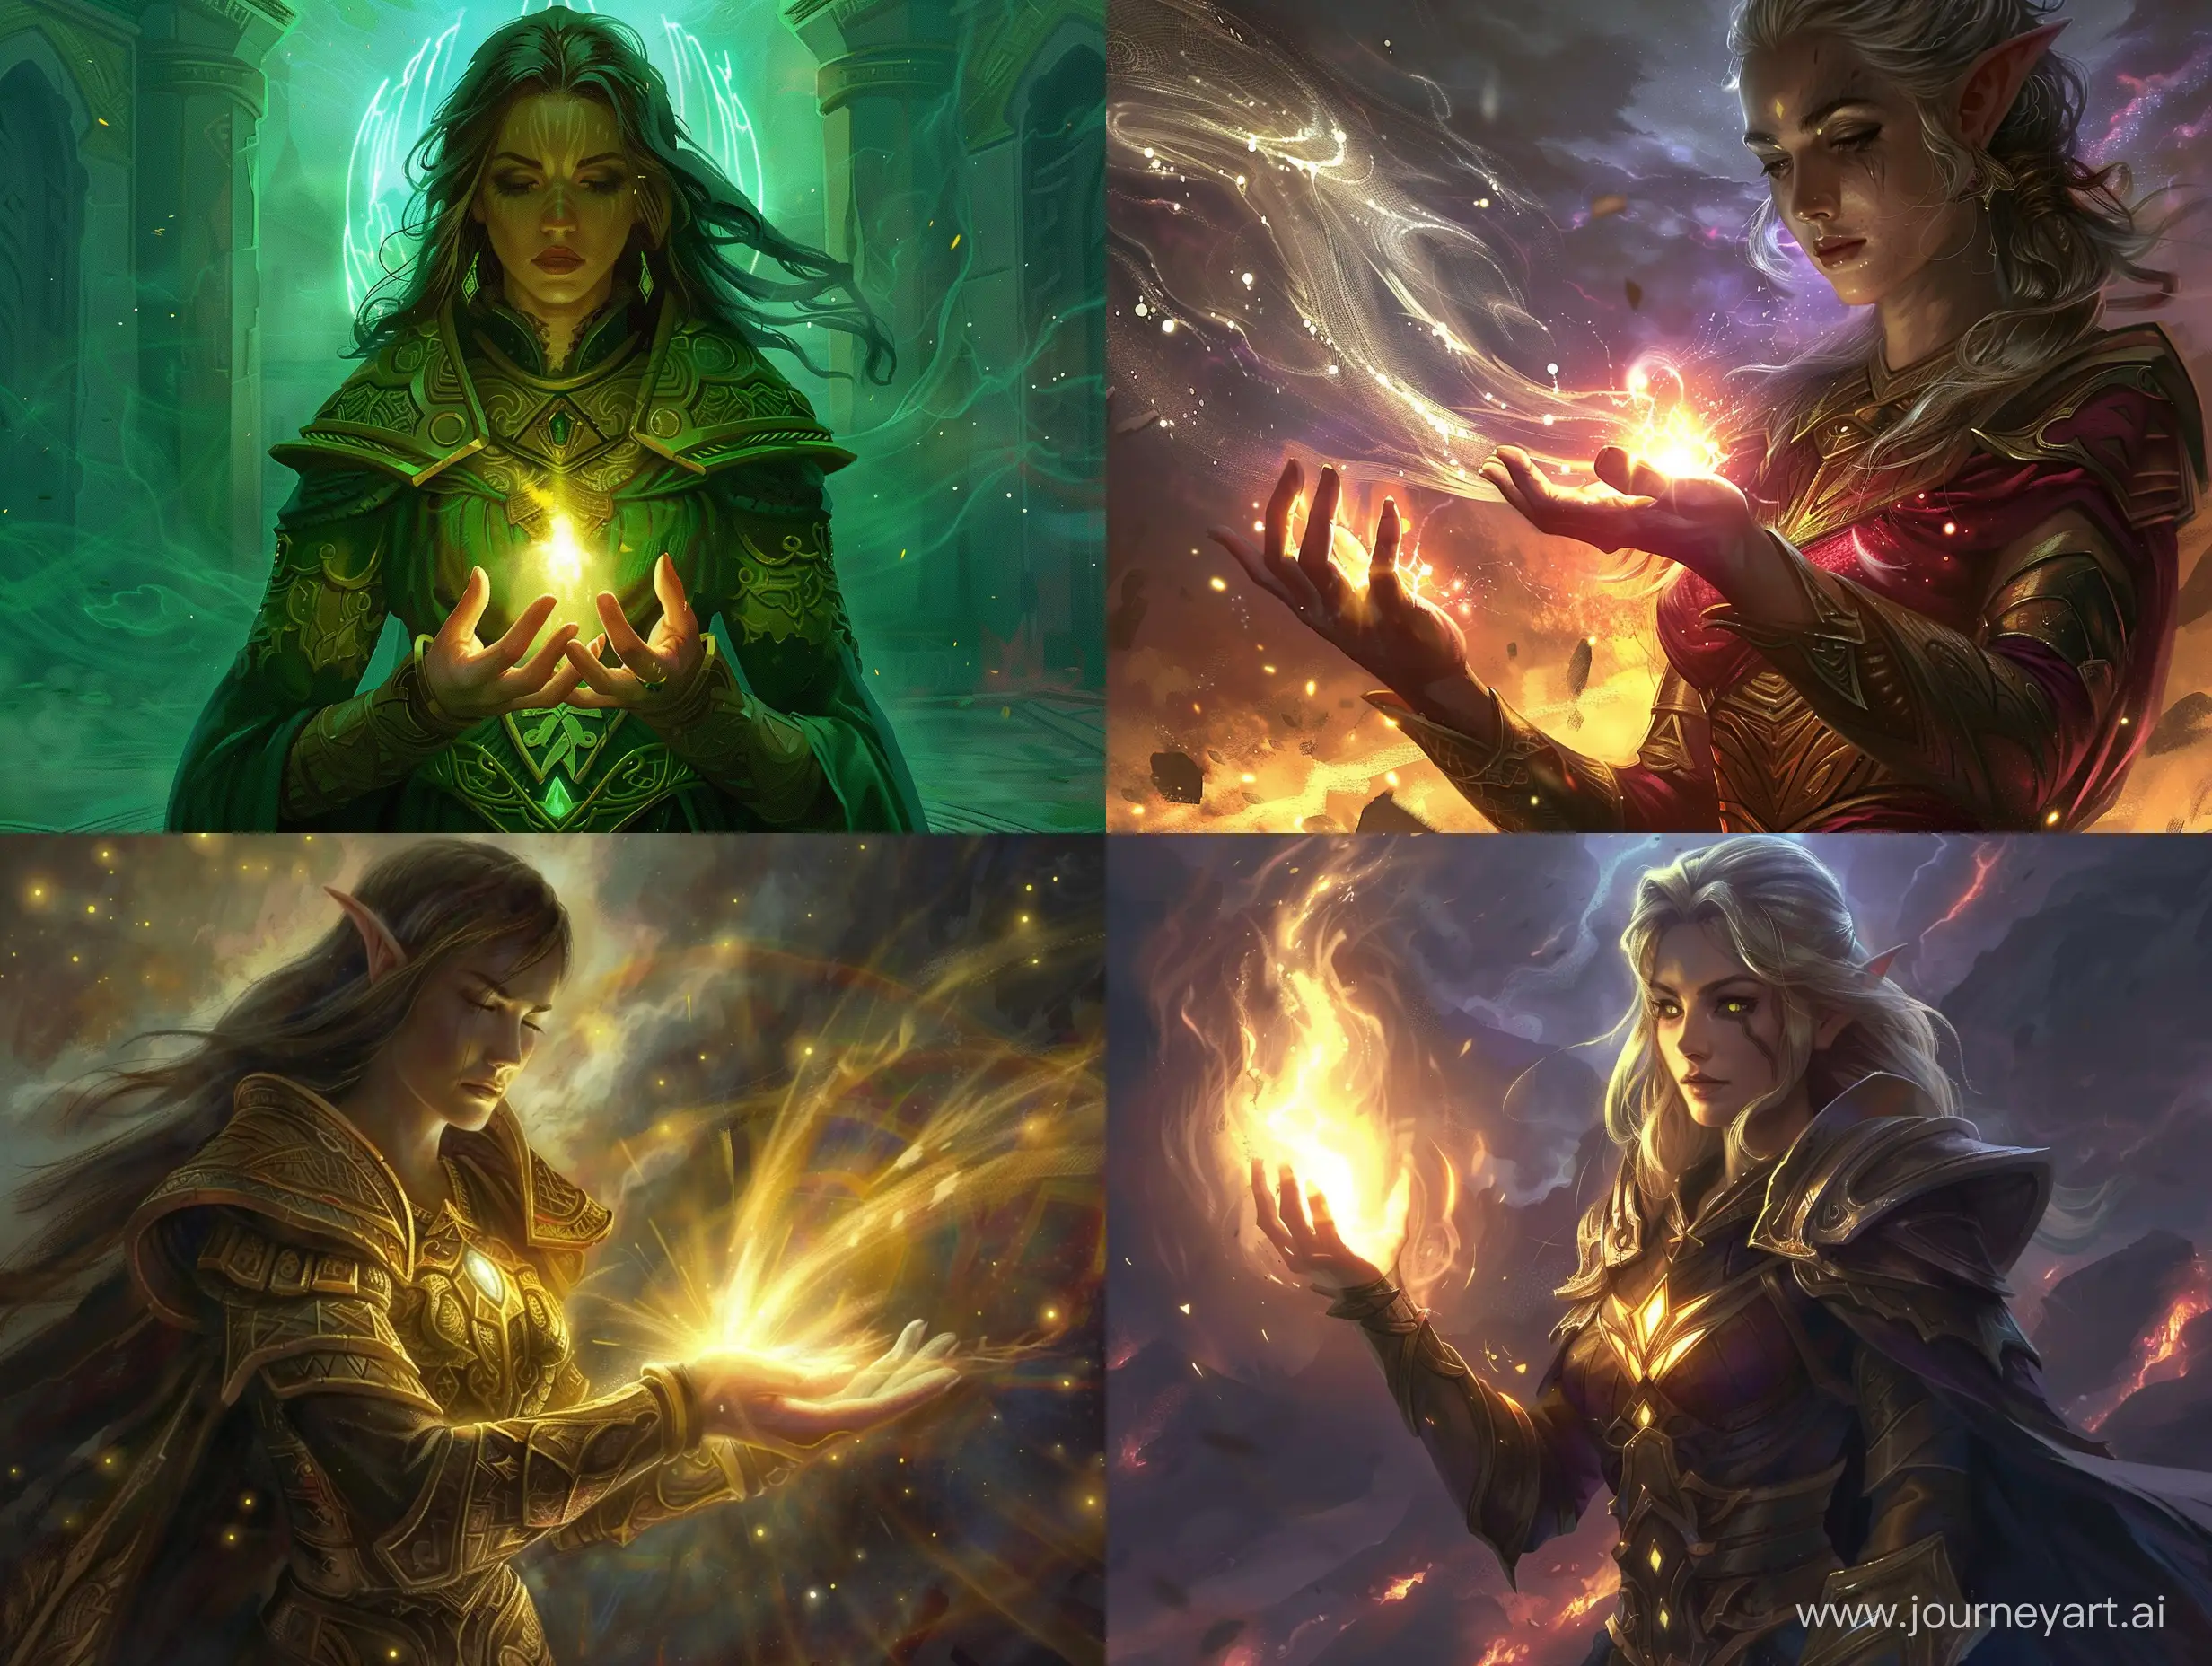 The Call of the forgotten gods, female Gods, deity, curse, metaphysics, faith, holding source of light in hands, in the style of world of warcraft